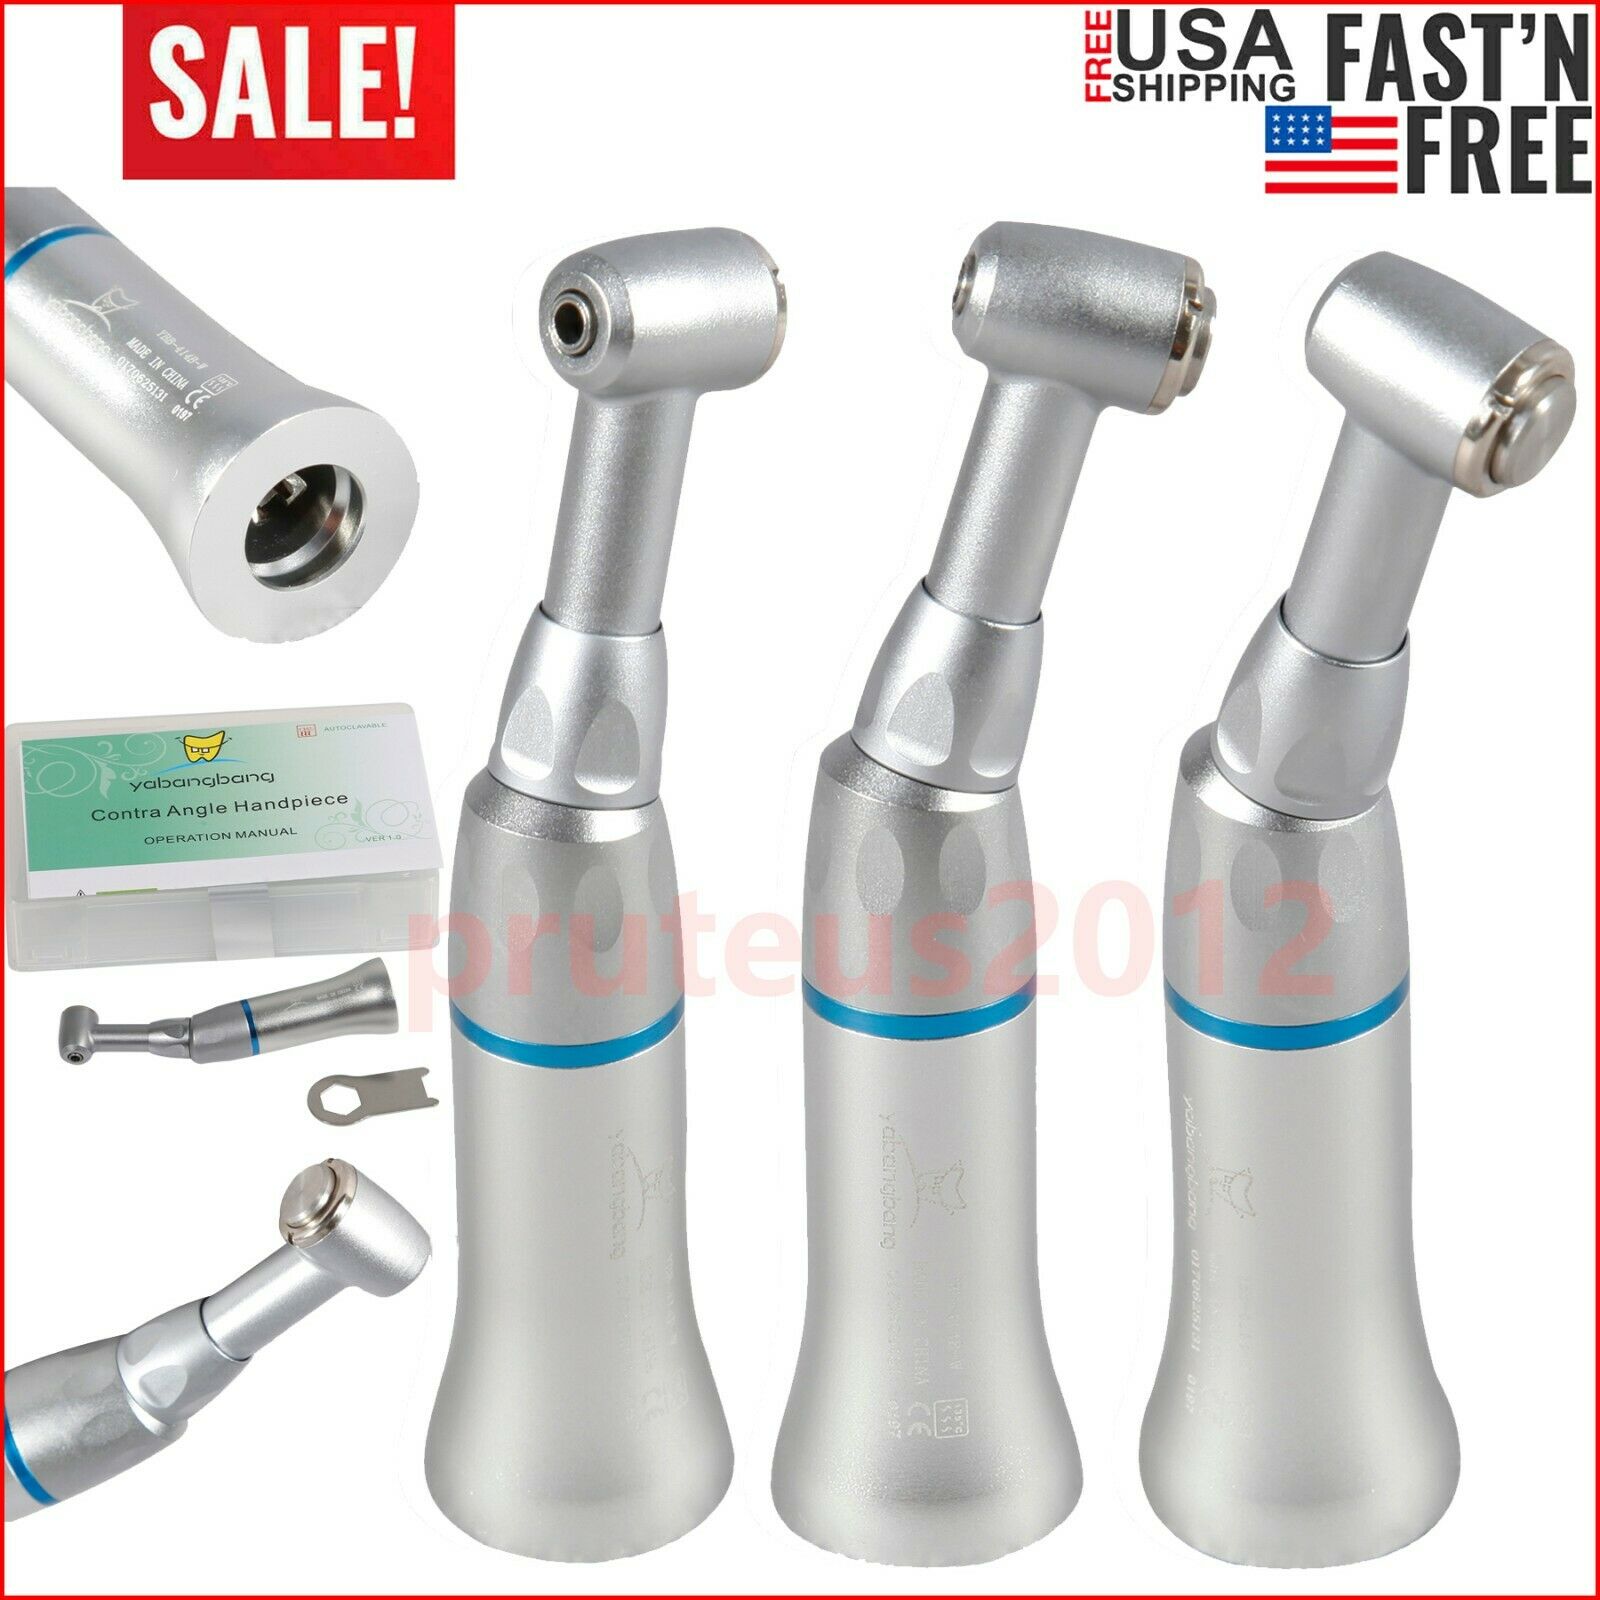 Nsk Style Dental Slow Low Speed Handpiece Contra Angle Push Button E-type Fda